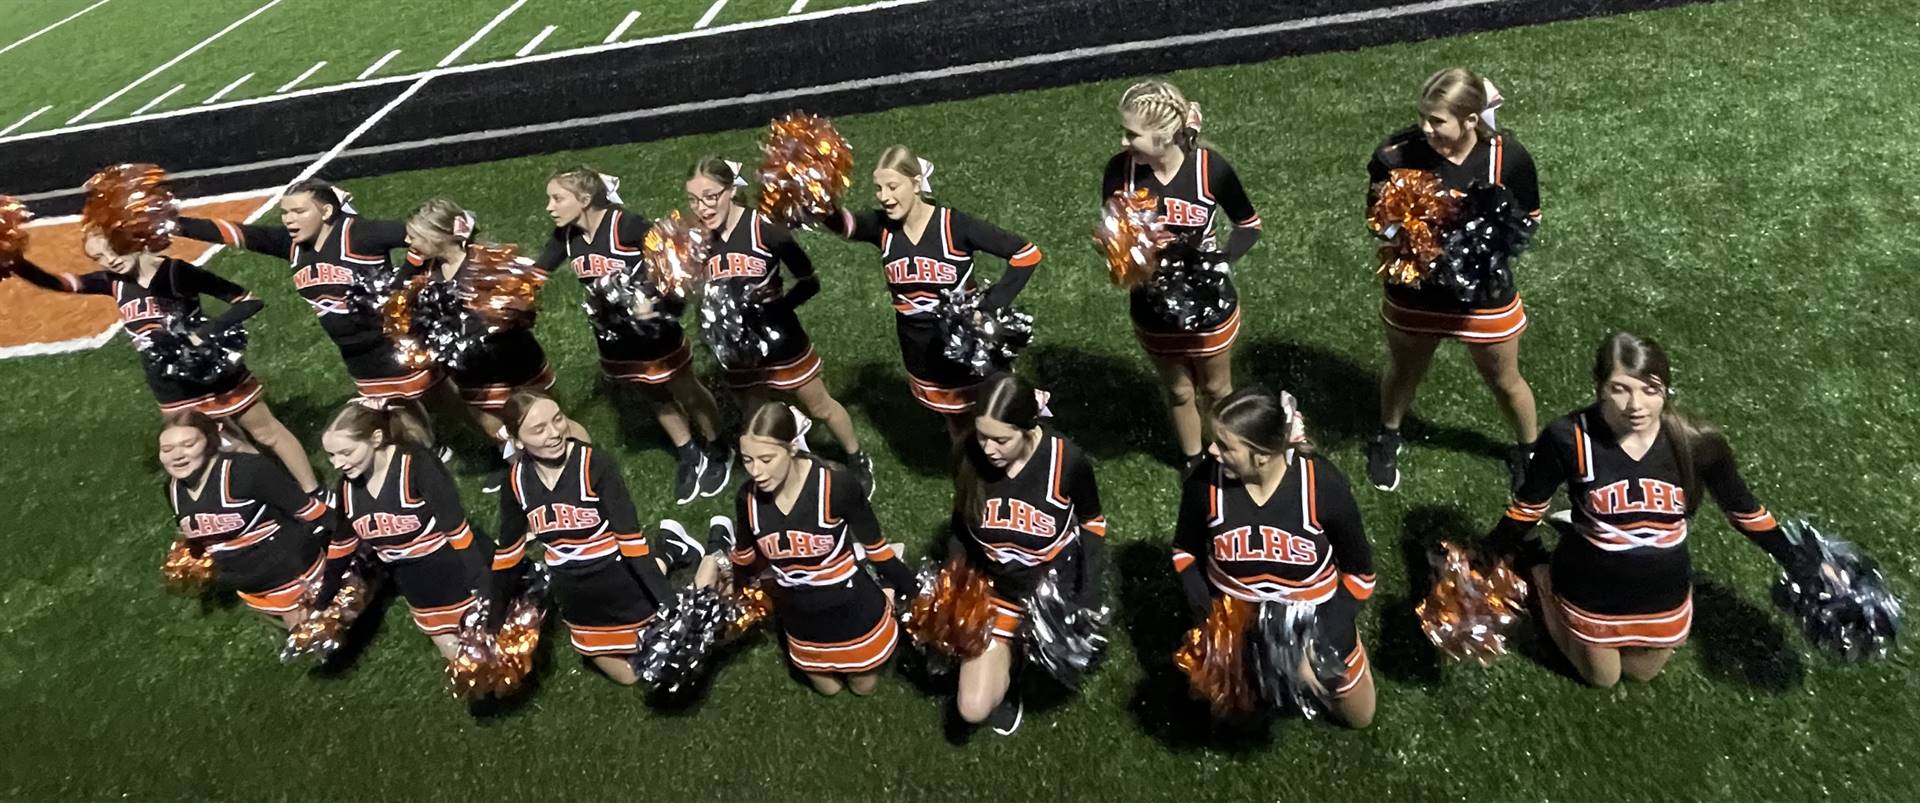 Cheerleaders Performing at the Coshocton Game